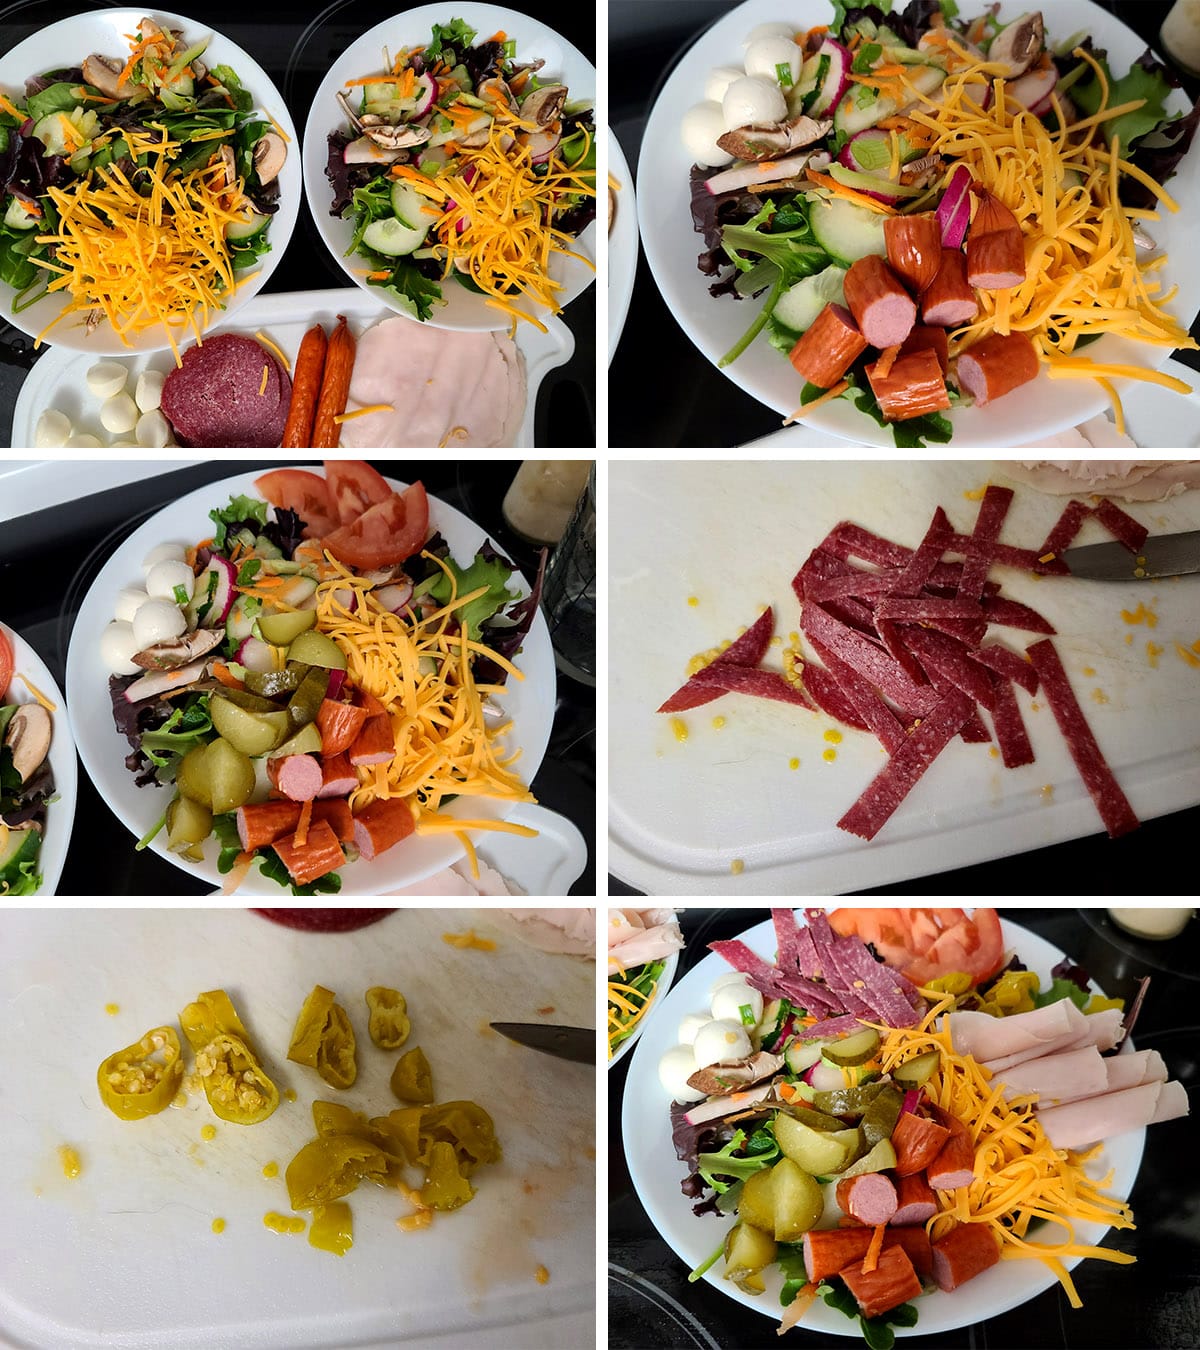 A 6 part image showing the meats and cheeses being prepared and arranged on top of the base salads.